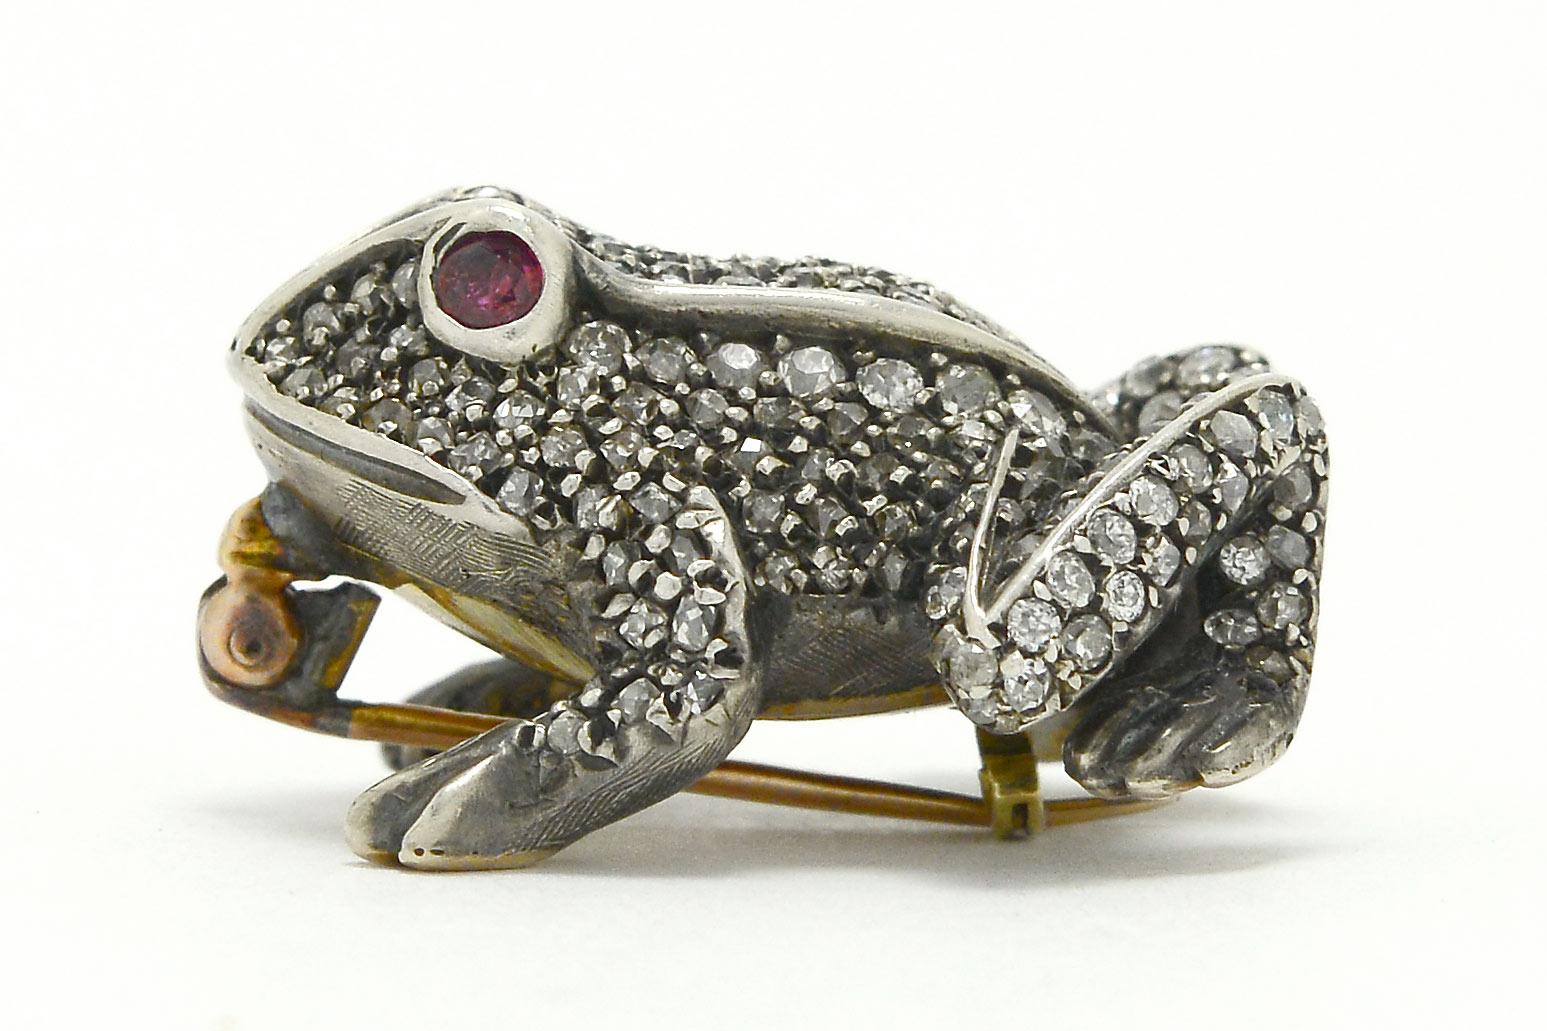 Antique Diamond Frog Pin Brooch Ruby Eyes Toad 2 Carats Old Mine European Rose 1